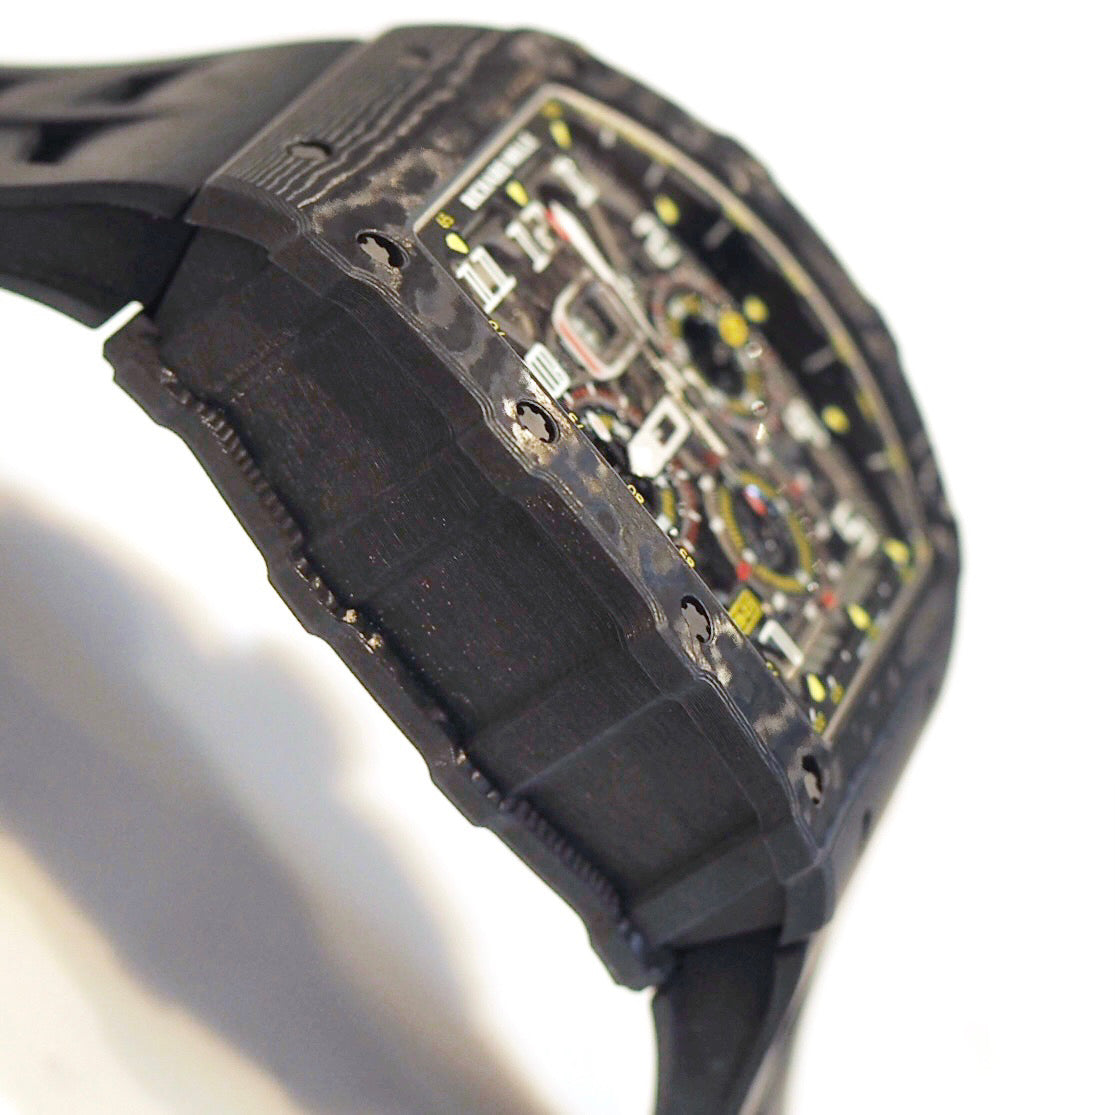 RM11-03 Automatic Flyback Chronograph Black  Richard Mille - 株式会社アート